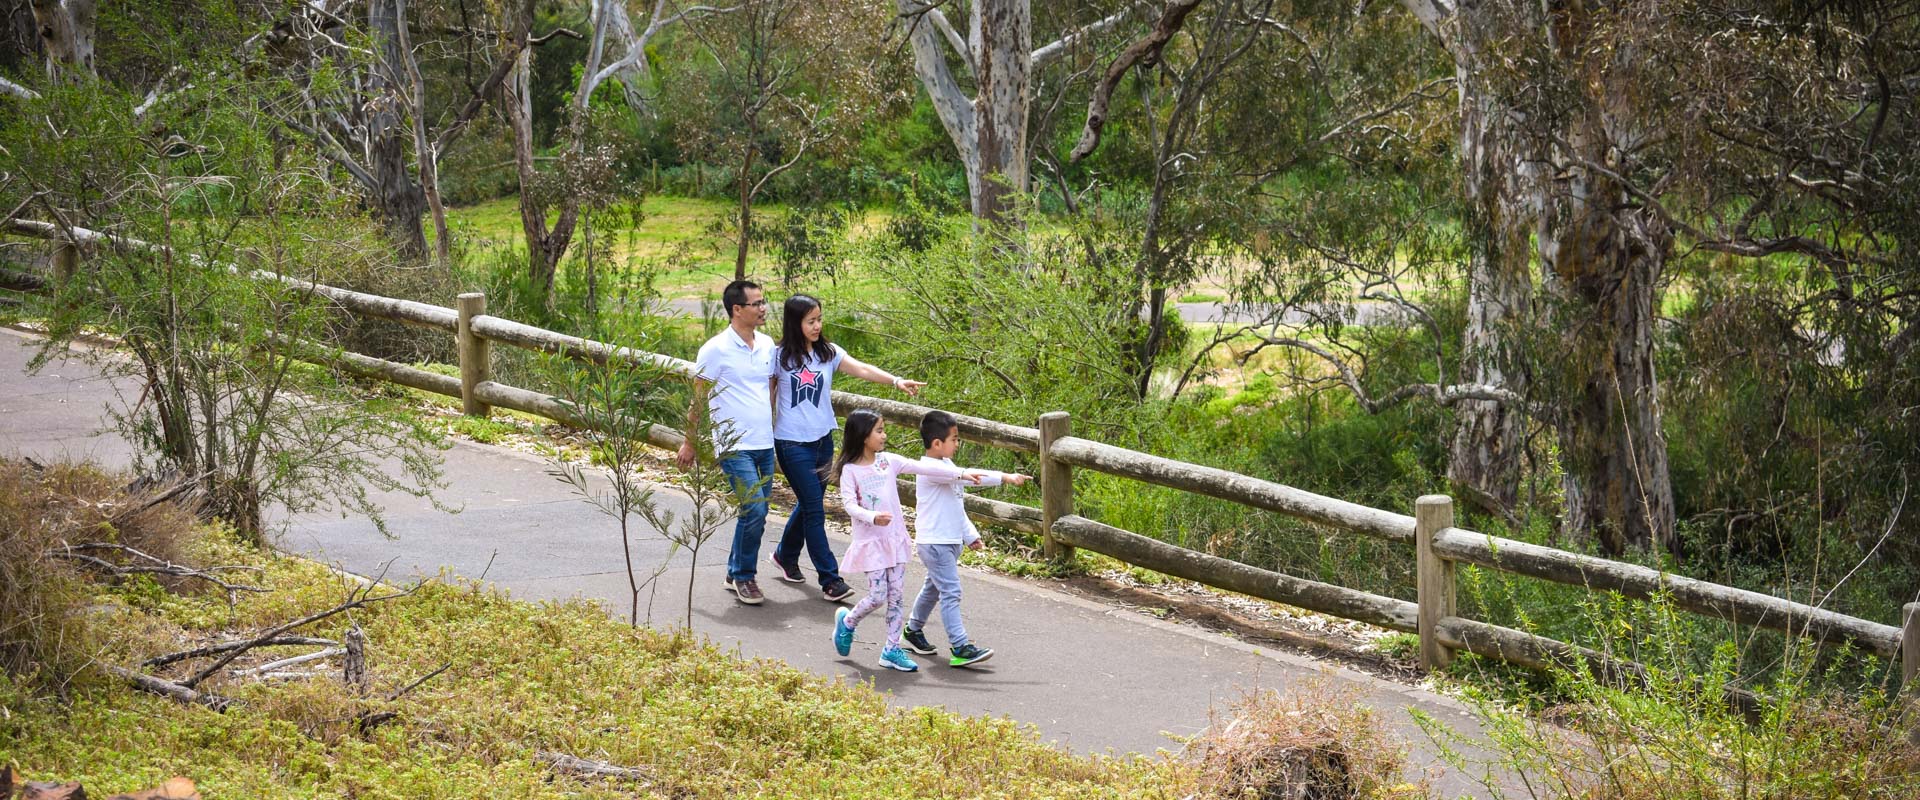 Family walk down a paved path surrounded by greenery. They point at something they've spotted. 